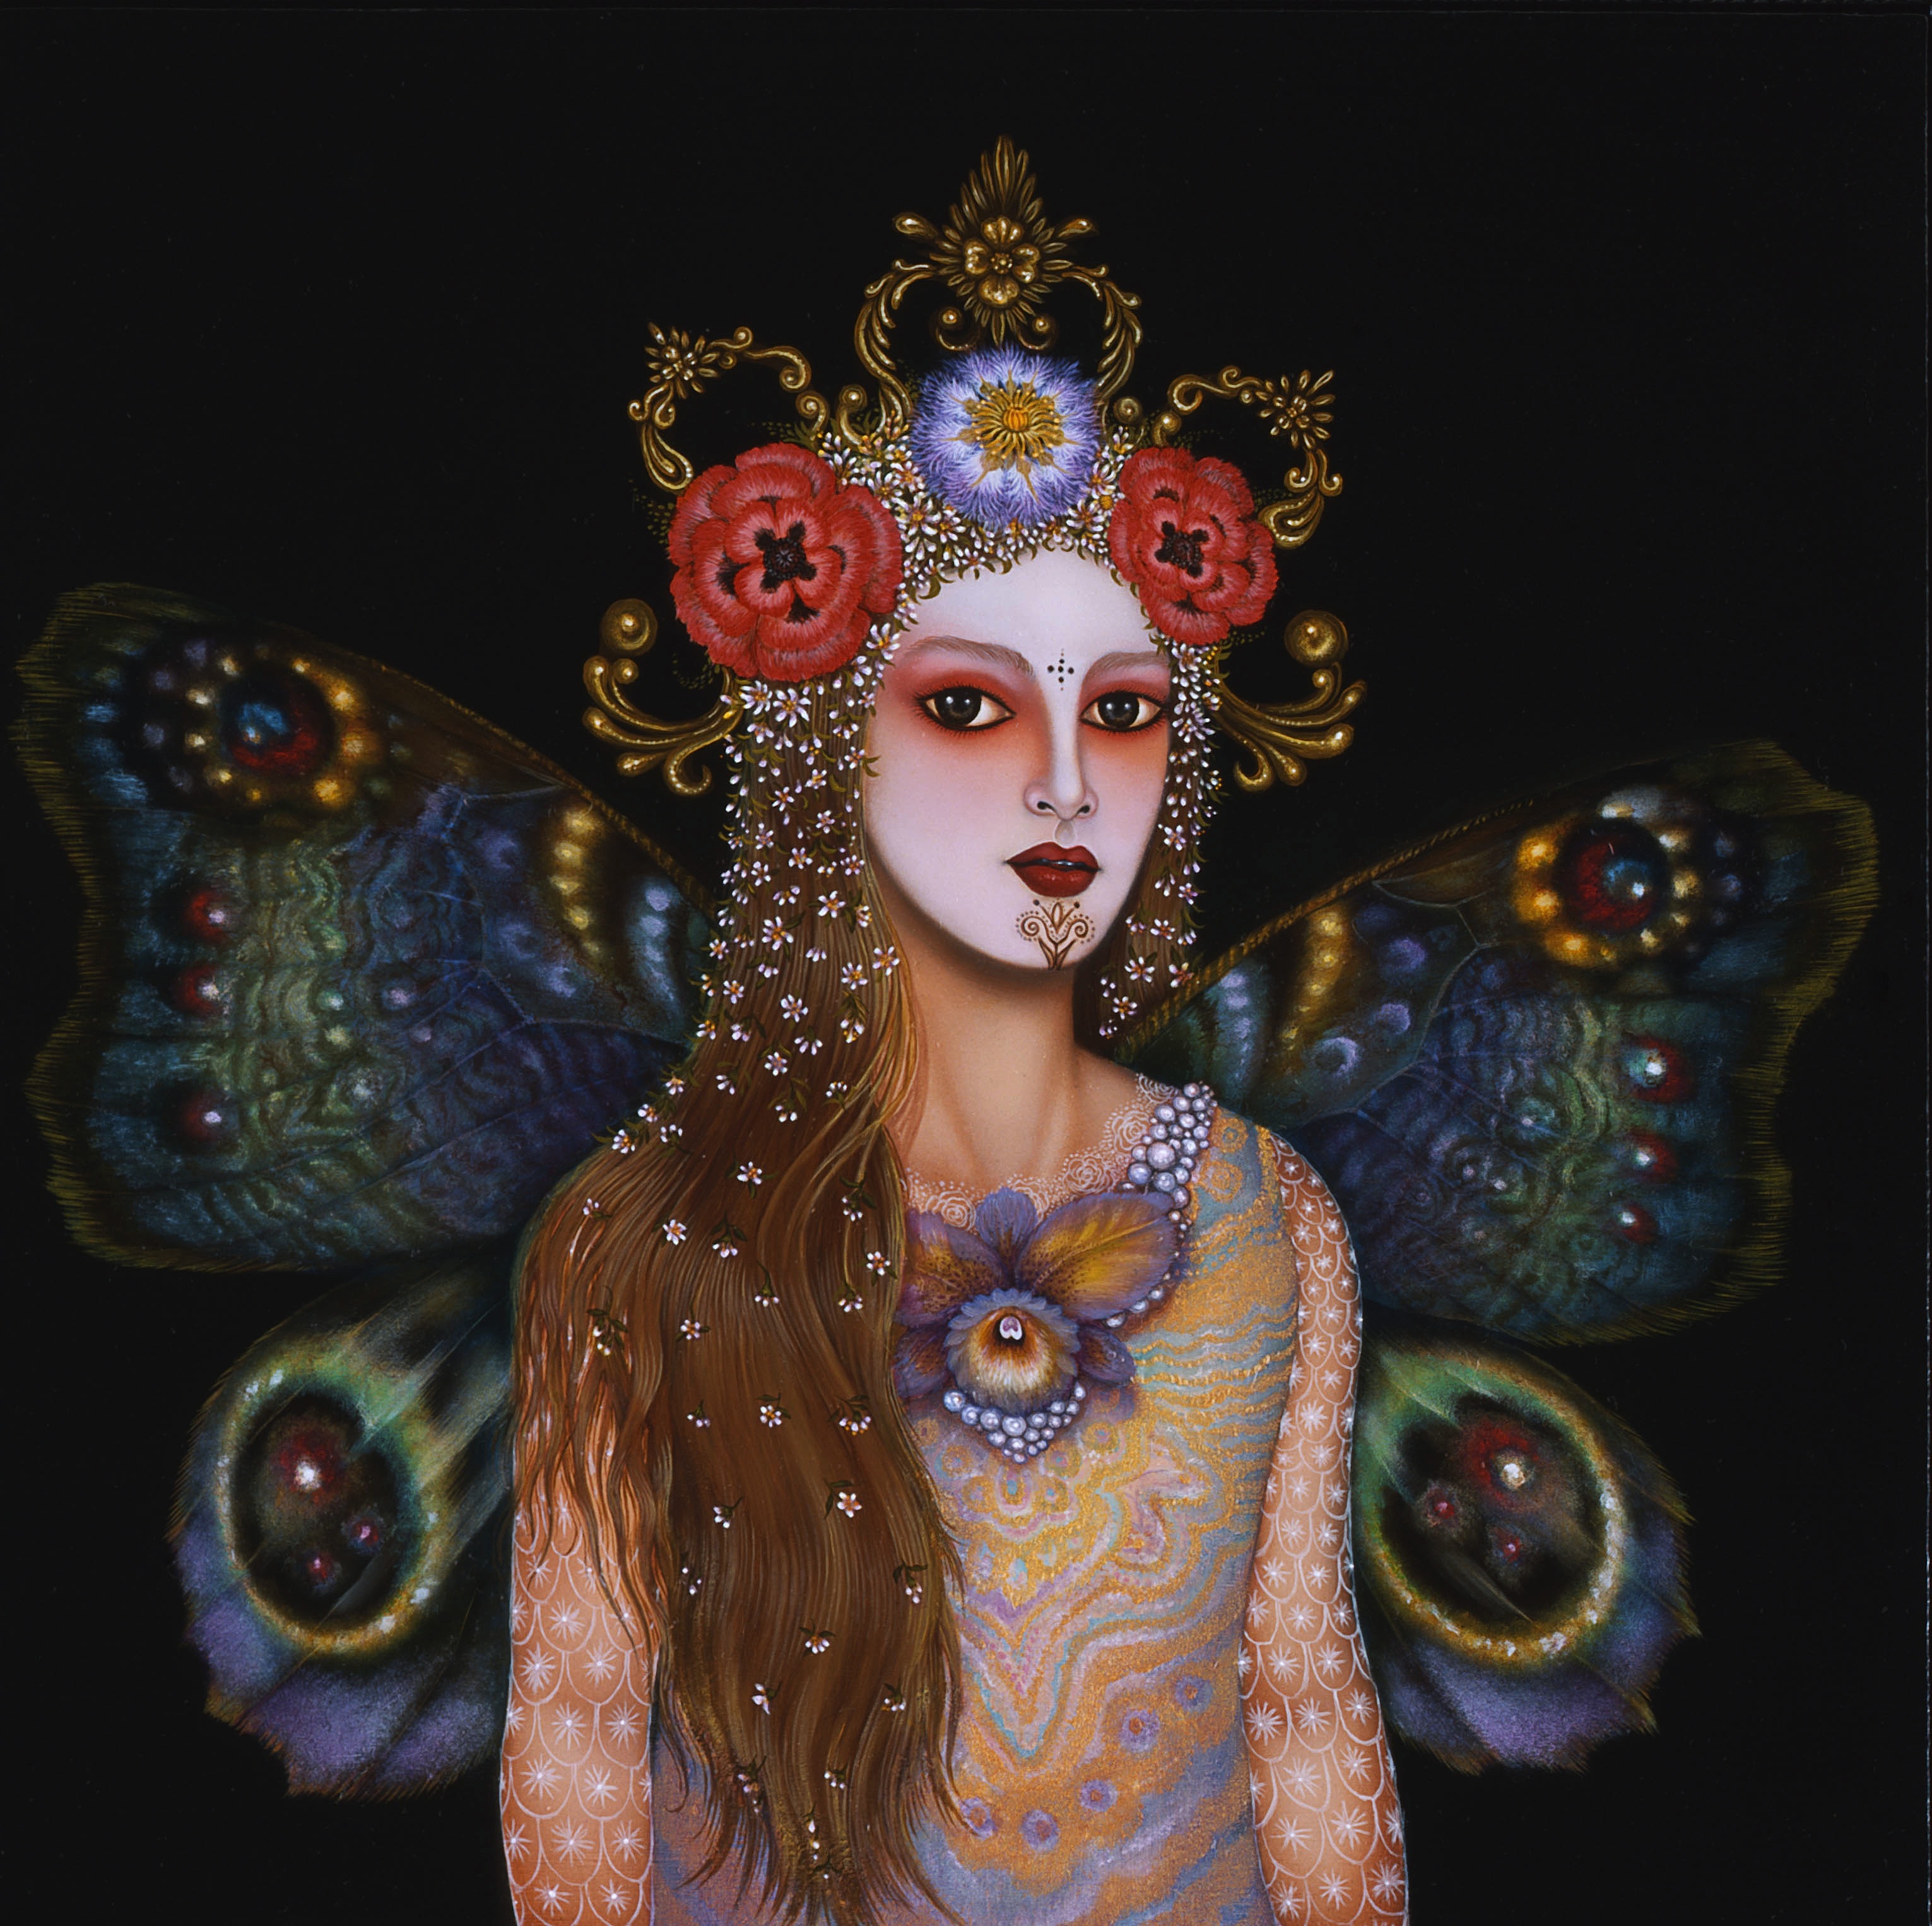 Persephone, 2003. Oil on wood, 12" x 12". Courtesy of the artist.